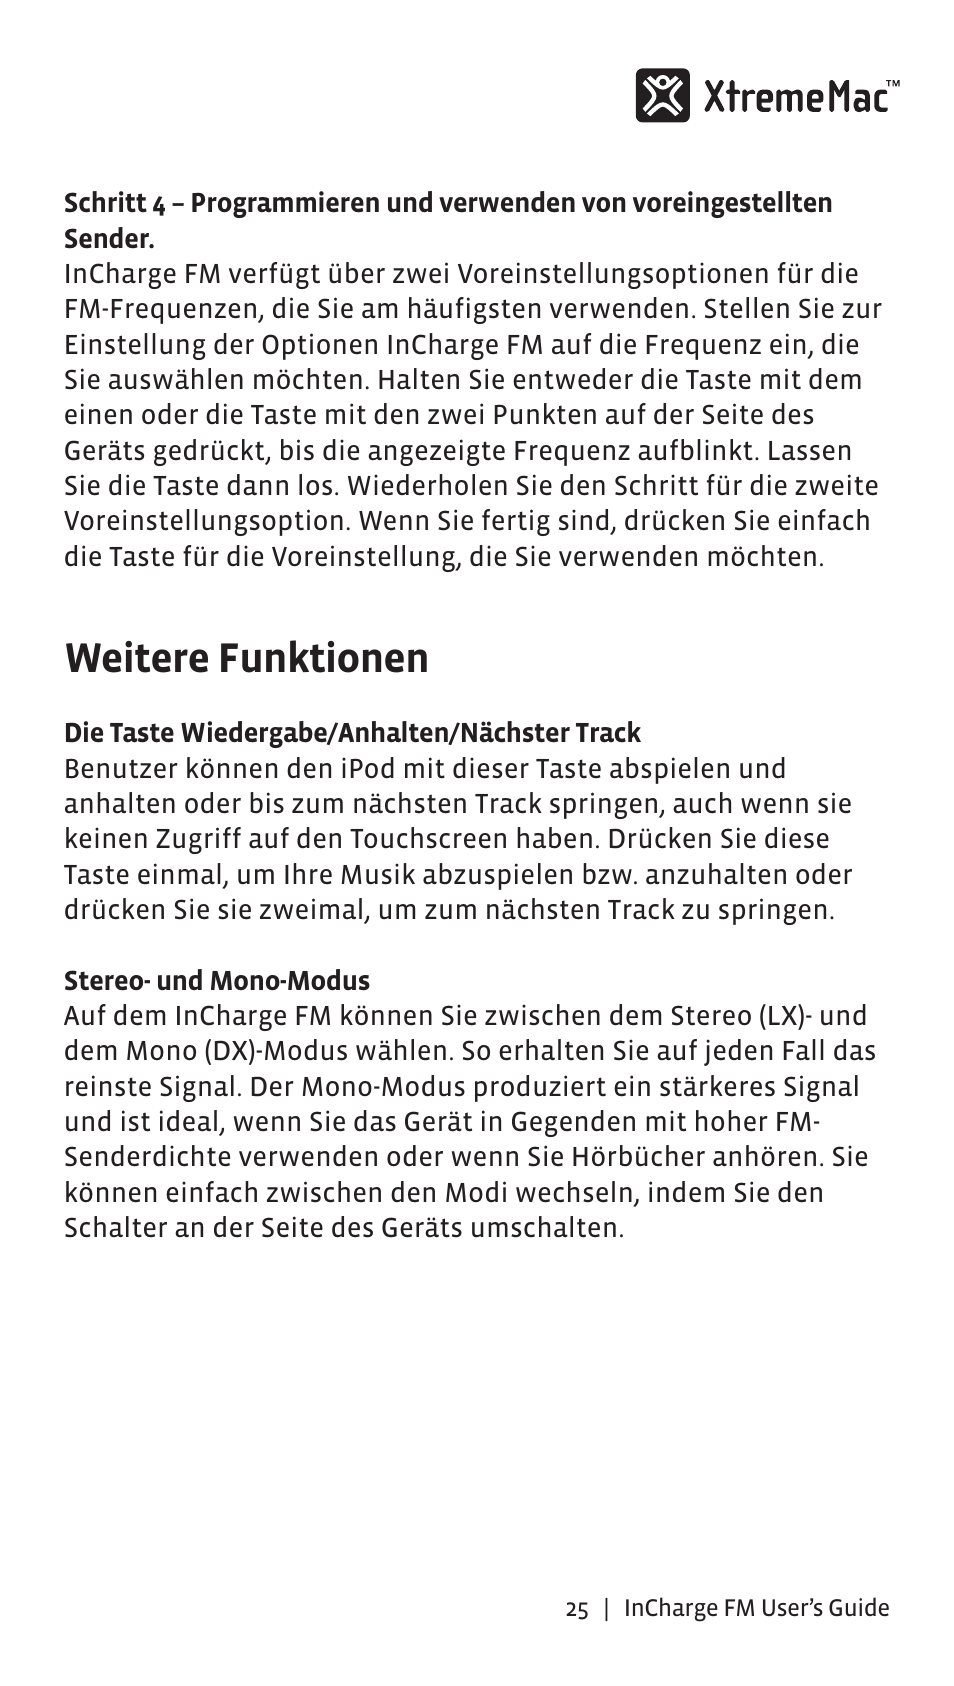 Weitere funktionen | XtremeMac Incharge FM User Manual | Page 24 / 35